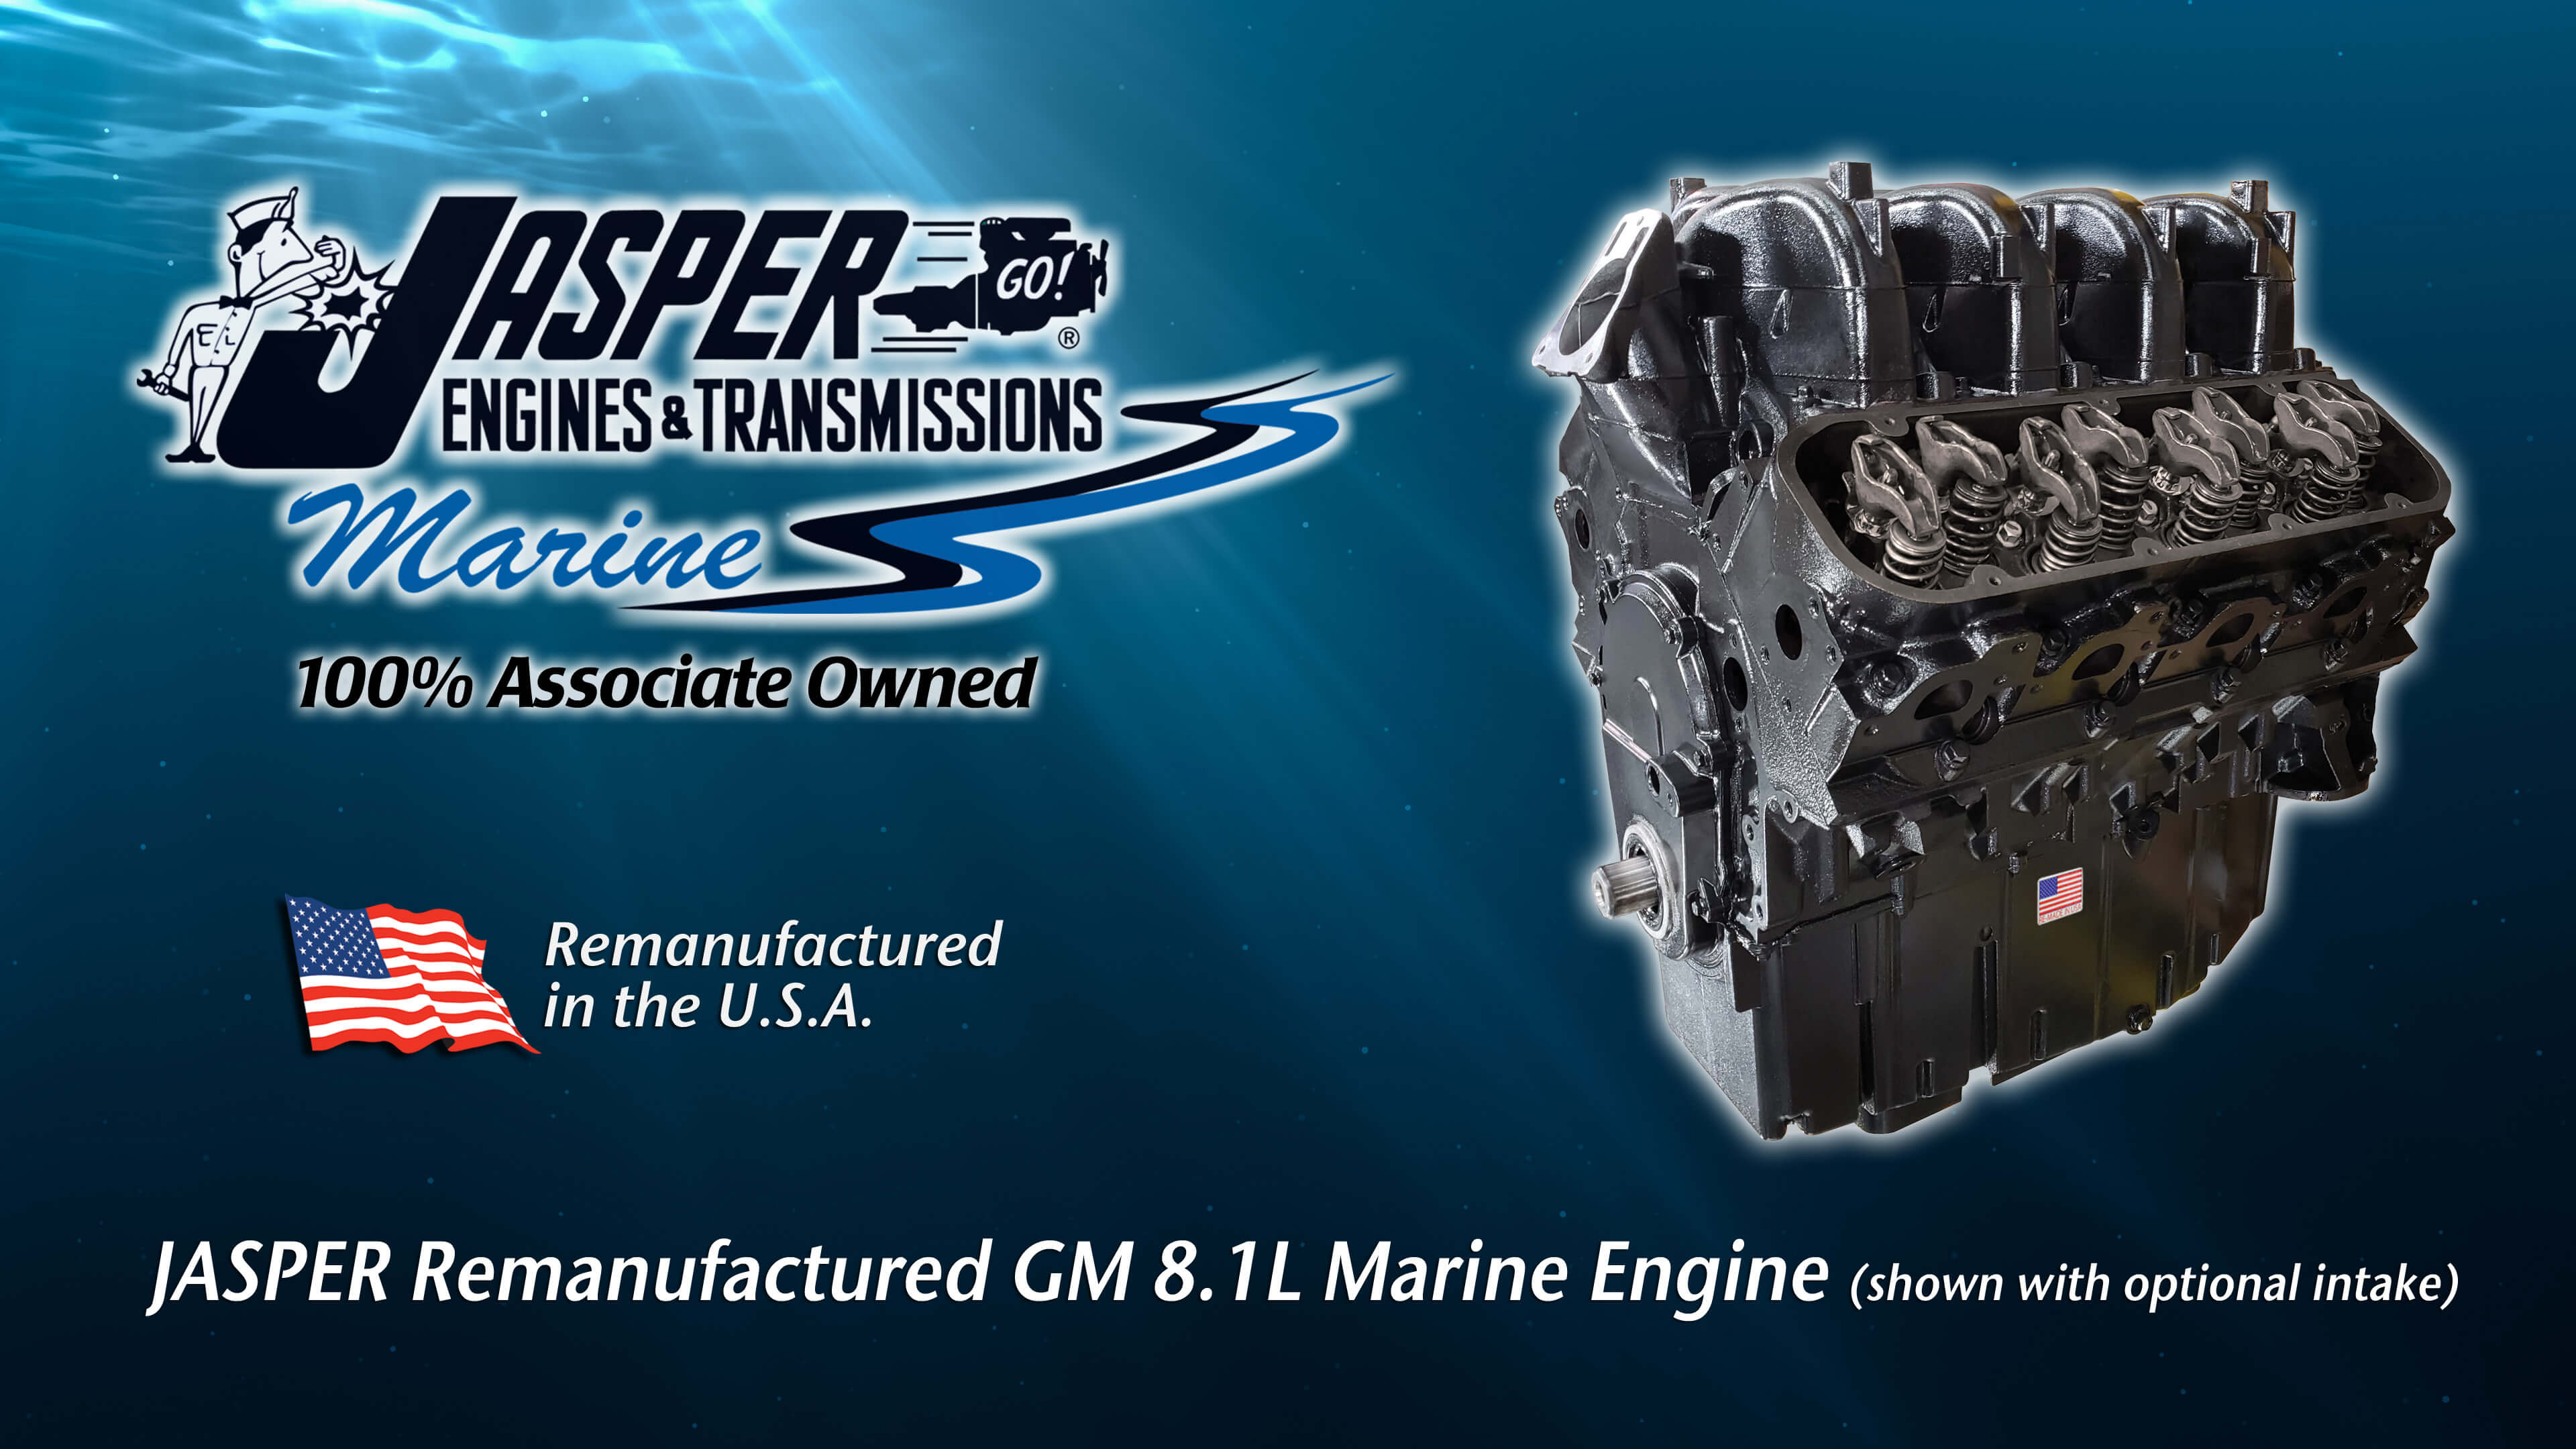 Jasper Remanufactured Engines And Transmissions